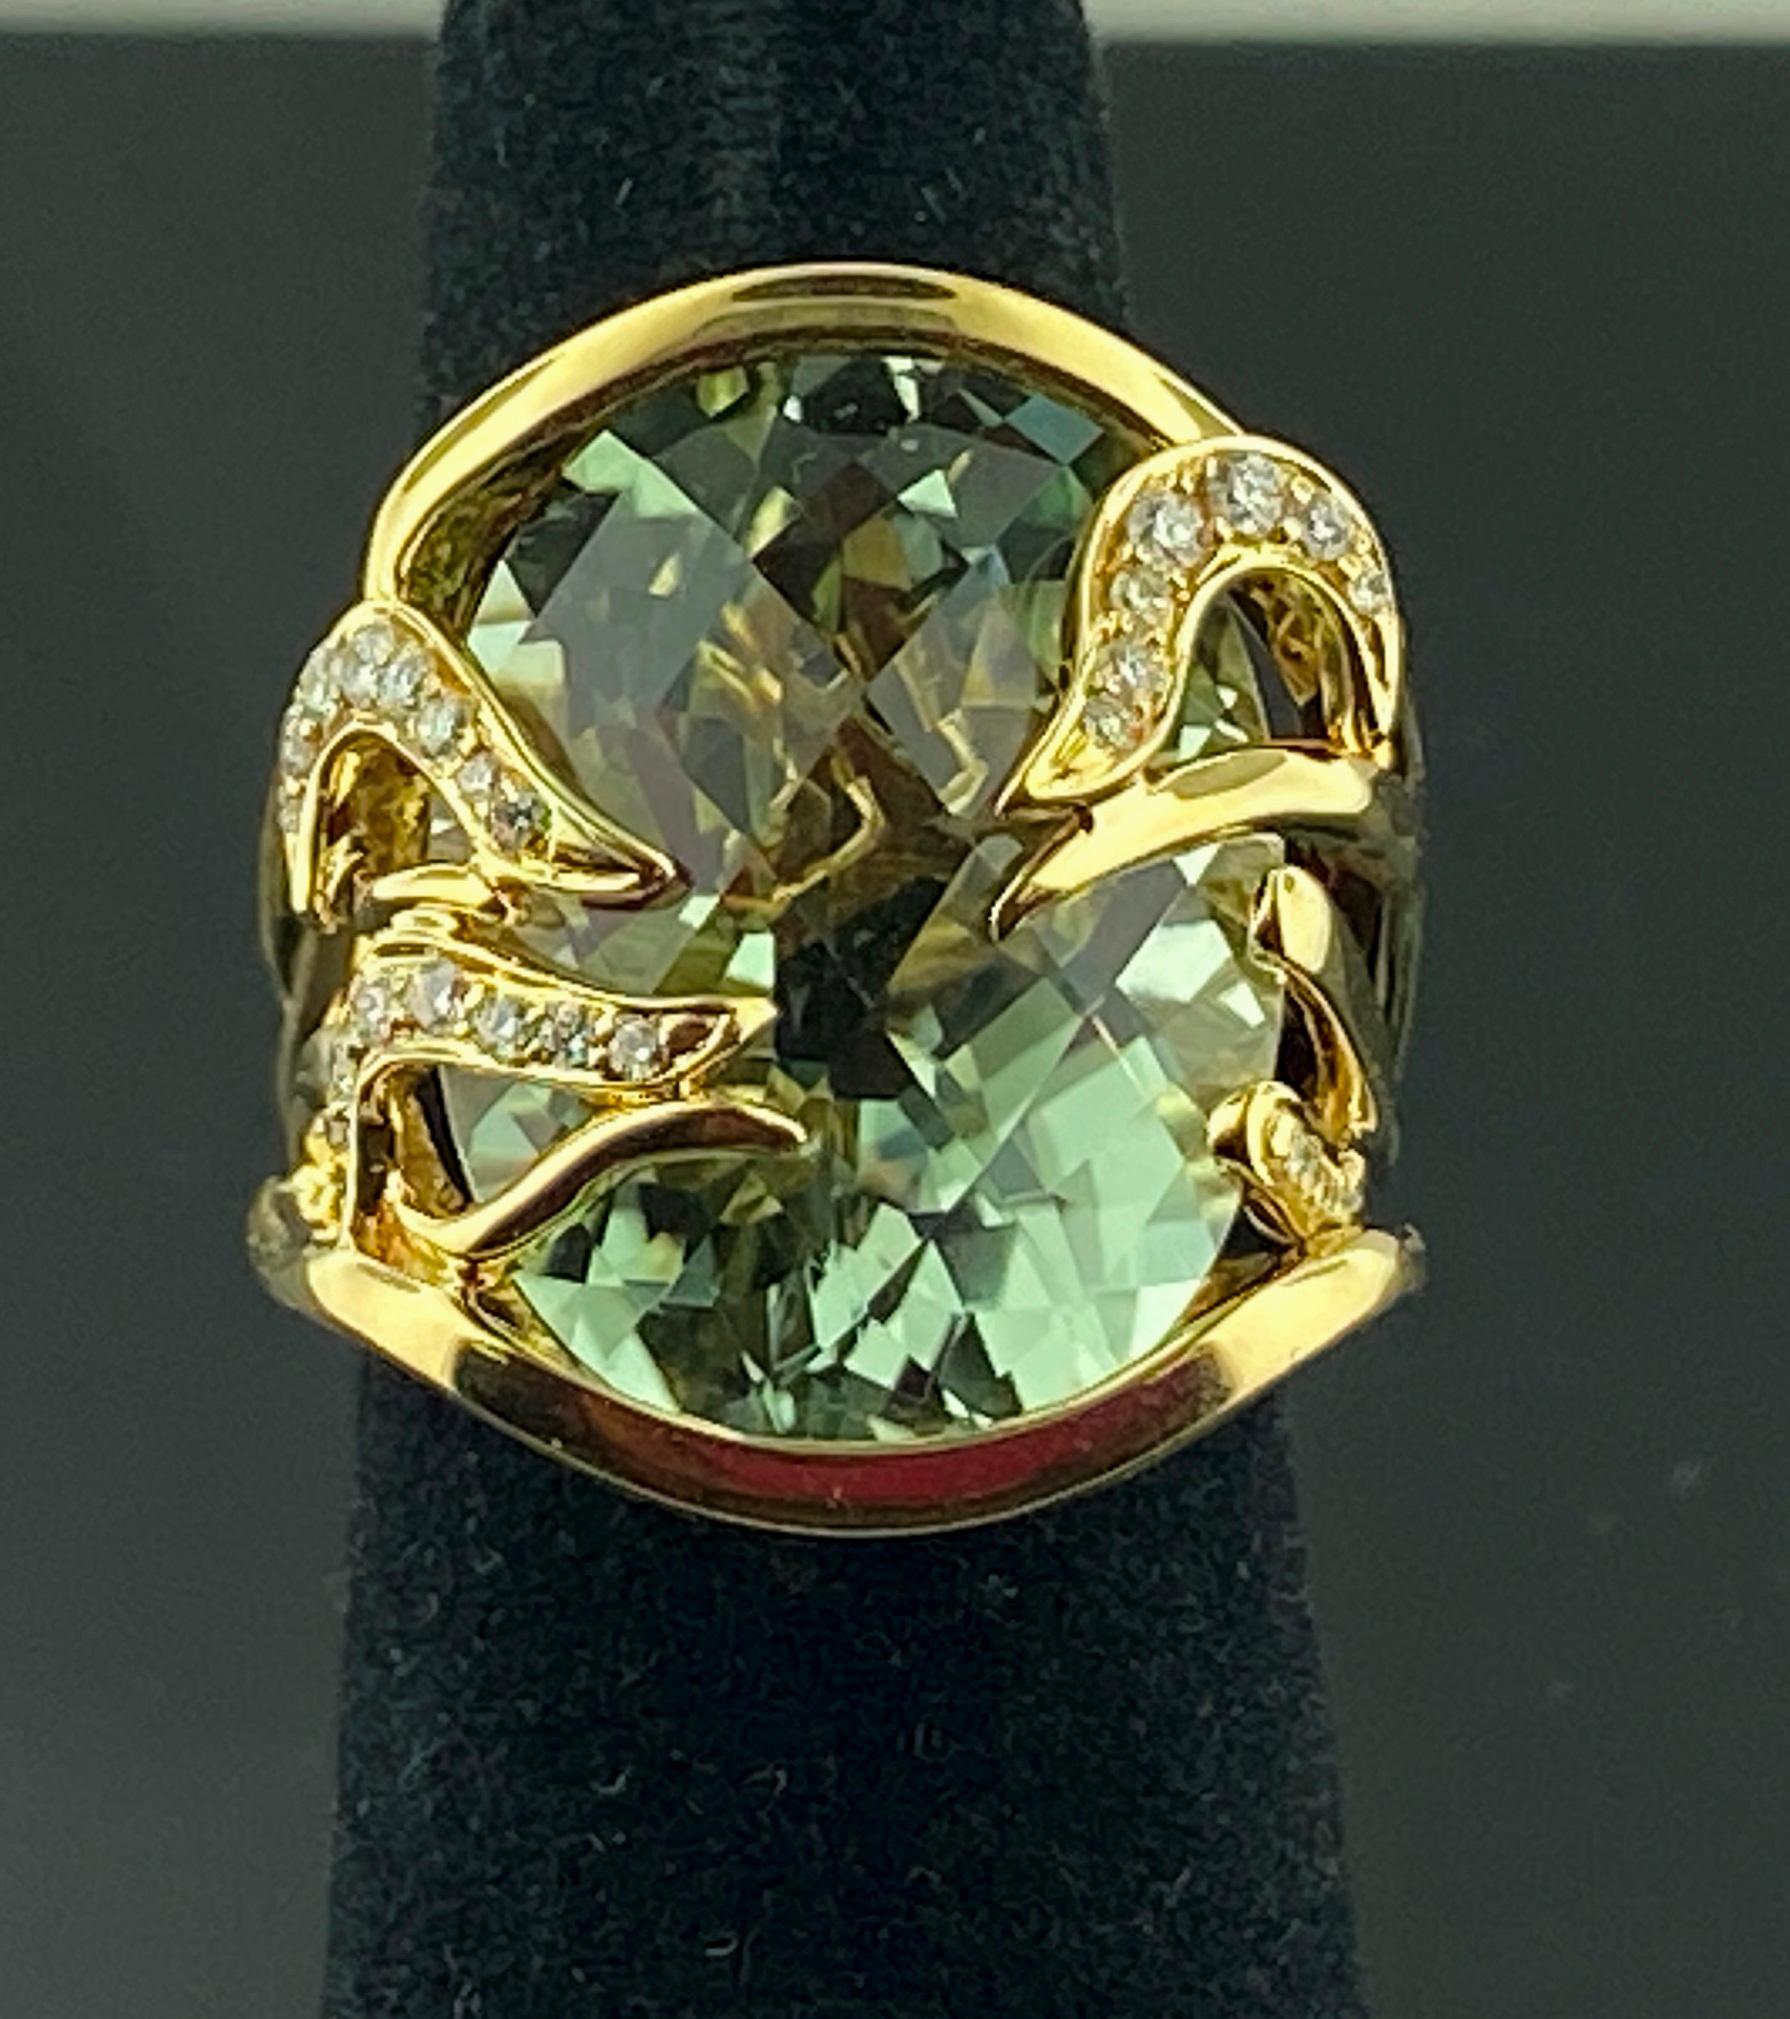 Set in 18 karat yellow gold, weighing 15 grams, is a 15.25 carat Aquamarine with 29 Round Brilliant Diamonds weighing 0.15 carats.  Ring Size is 6.75.